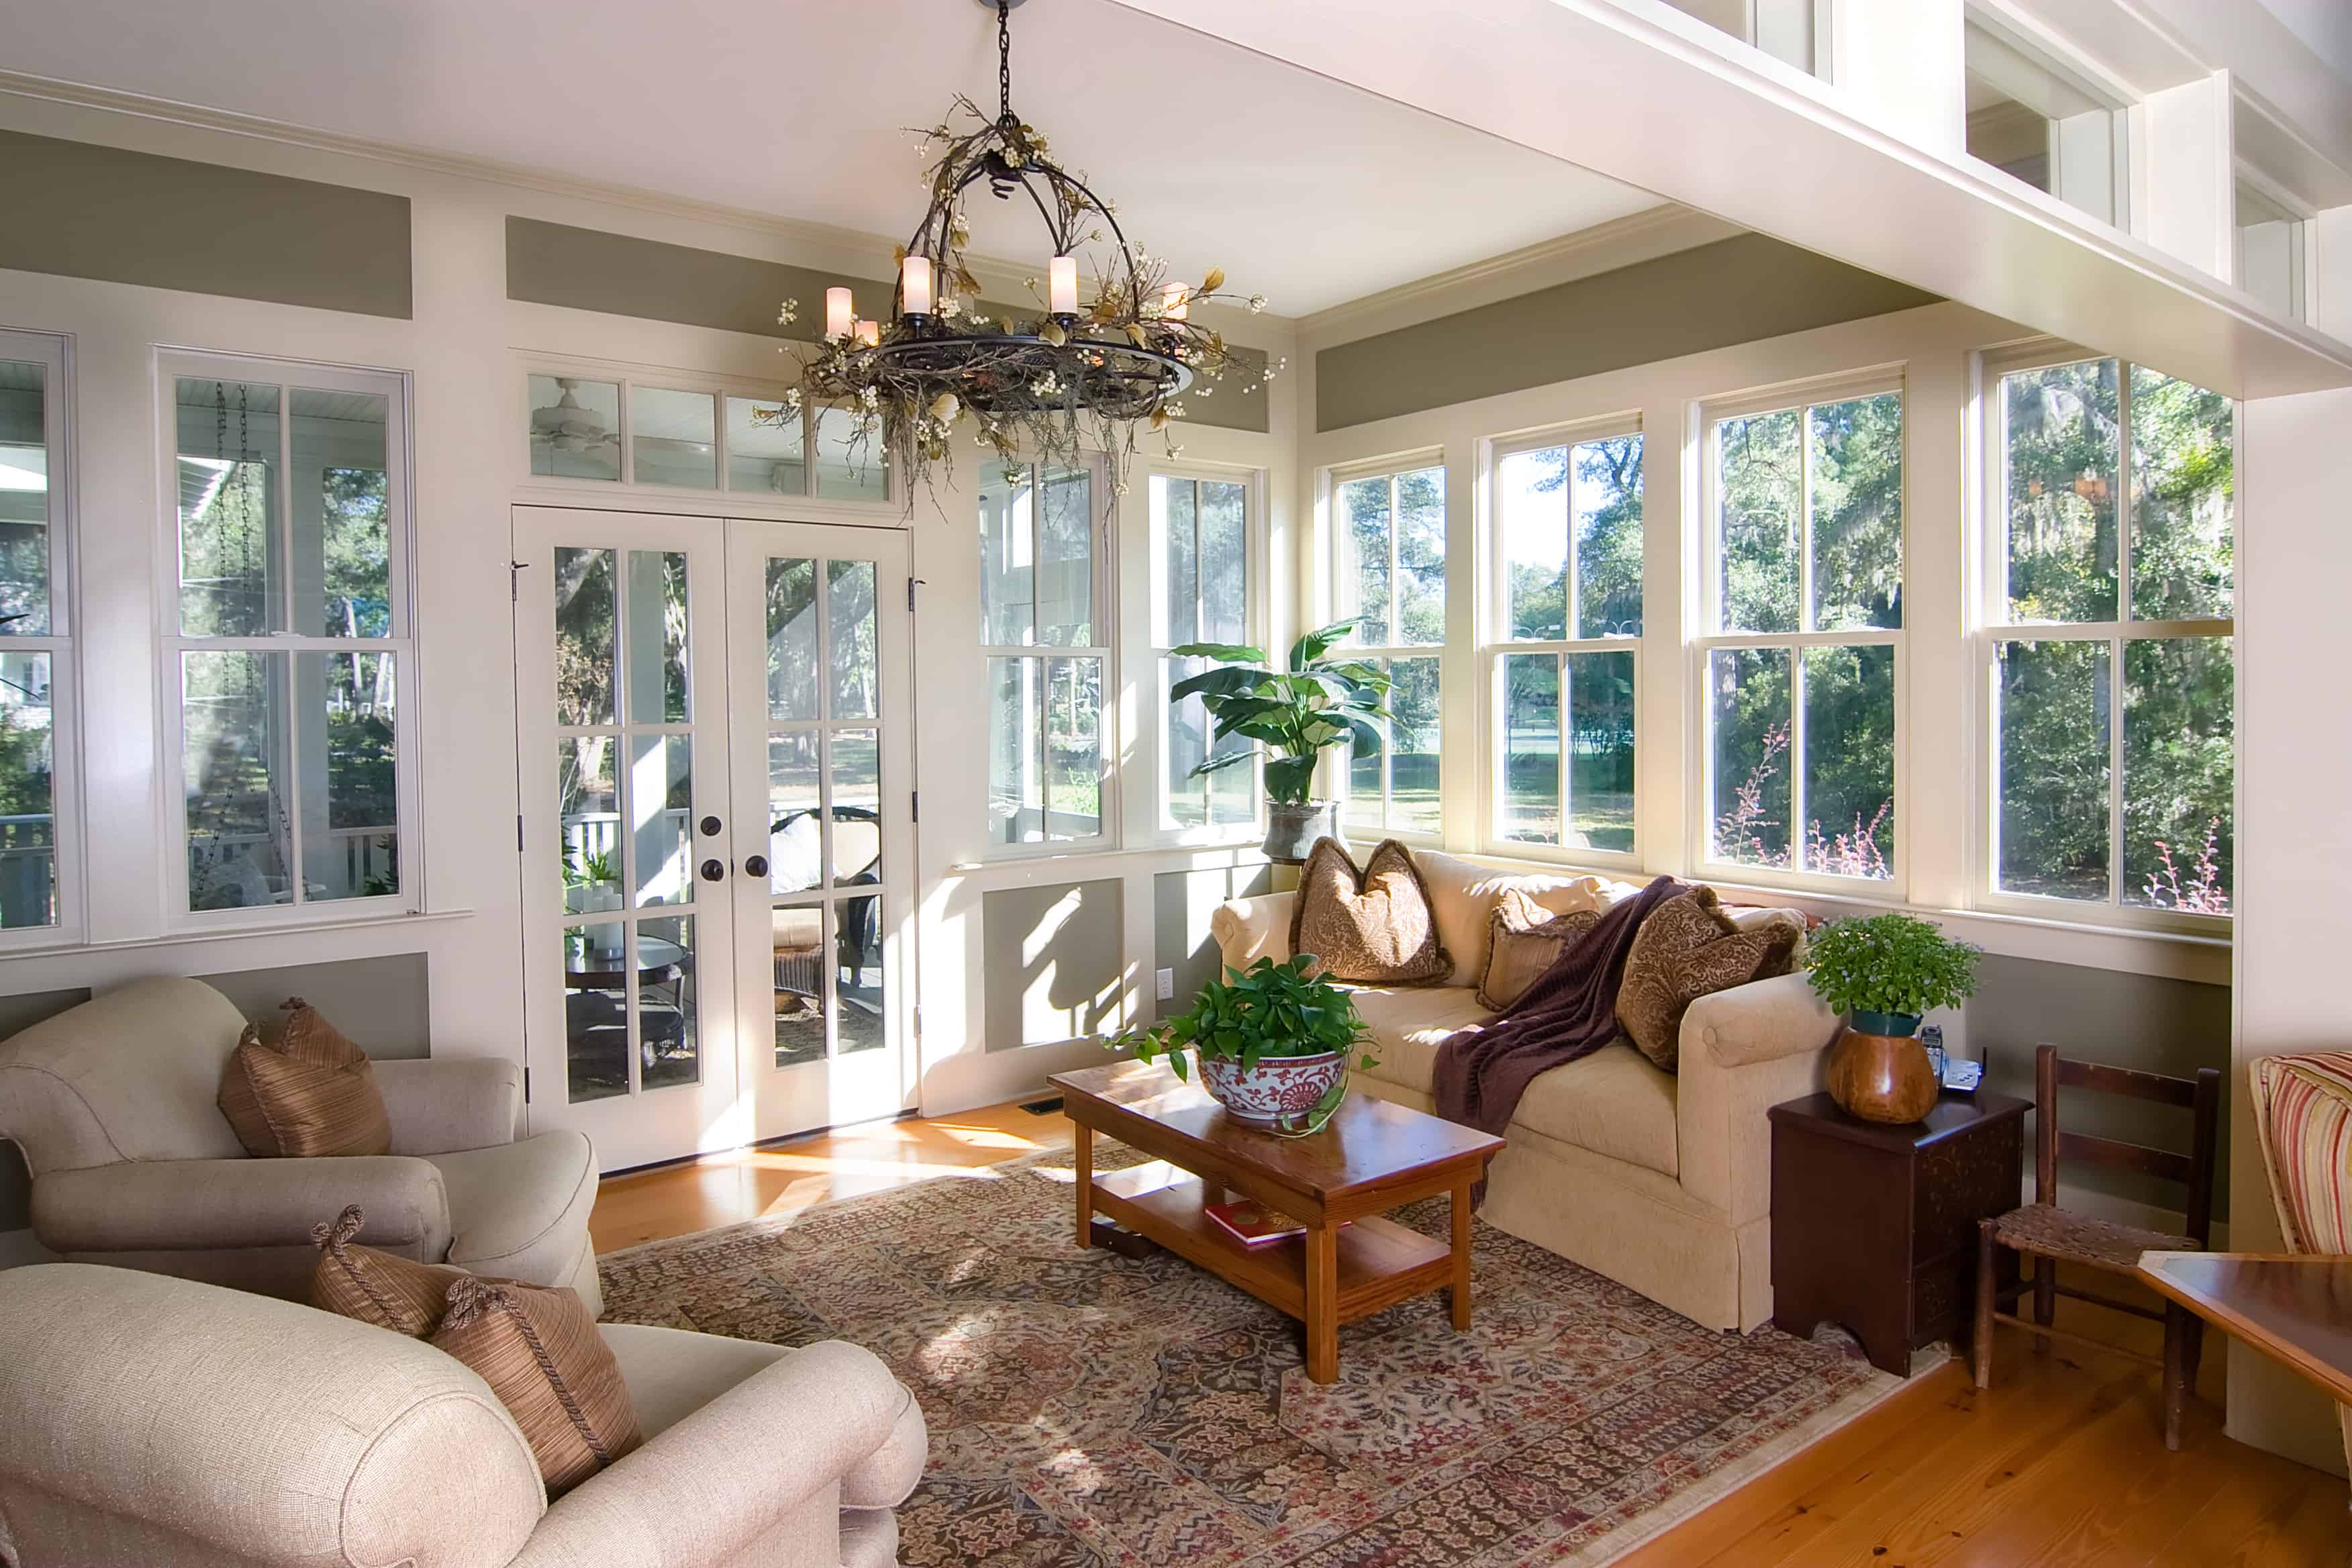 Convert Sunroom To Living Room In Florida